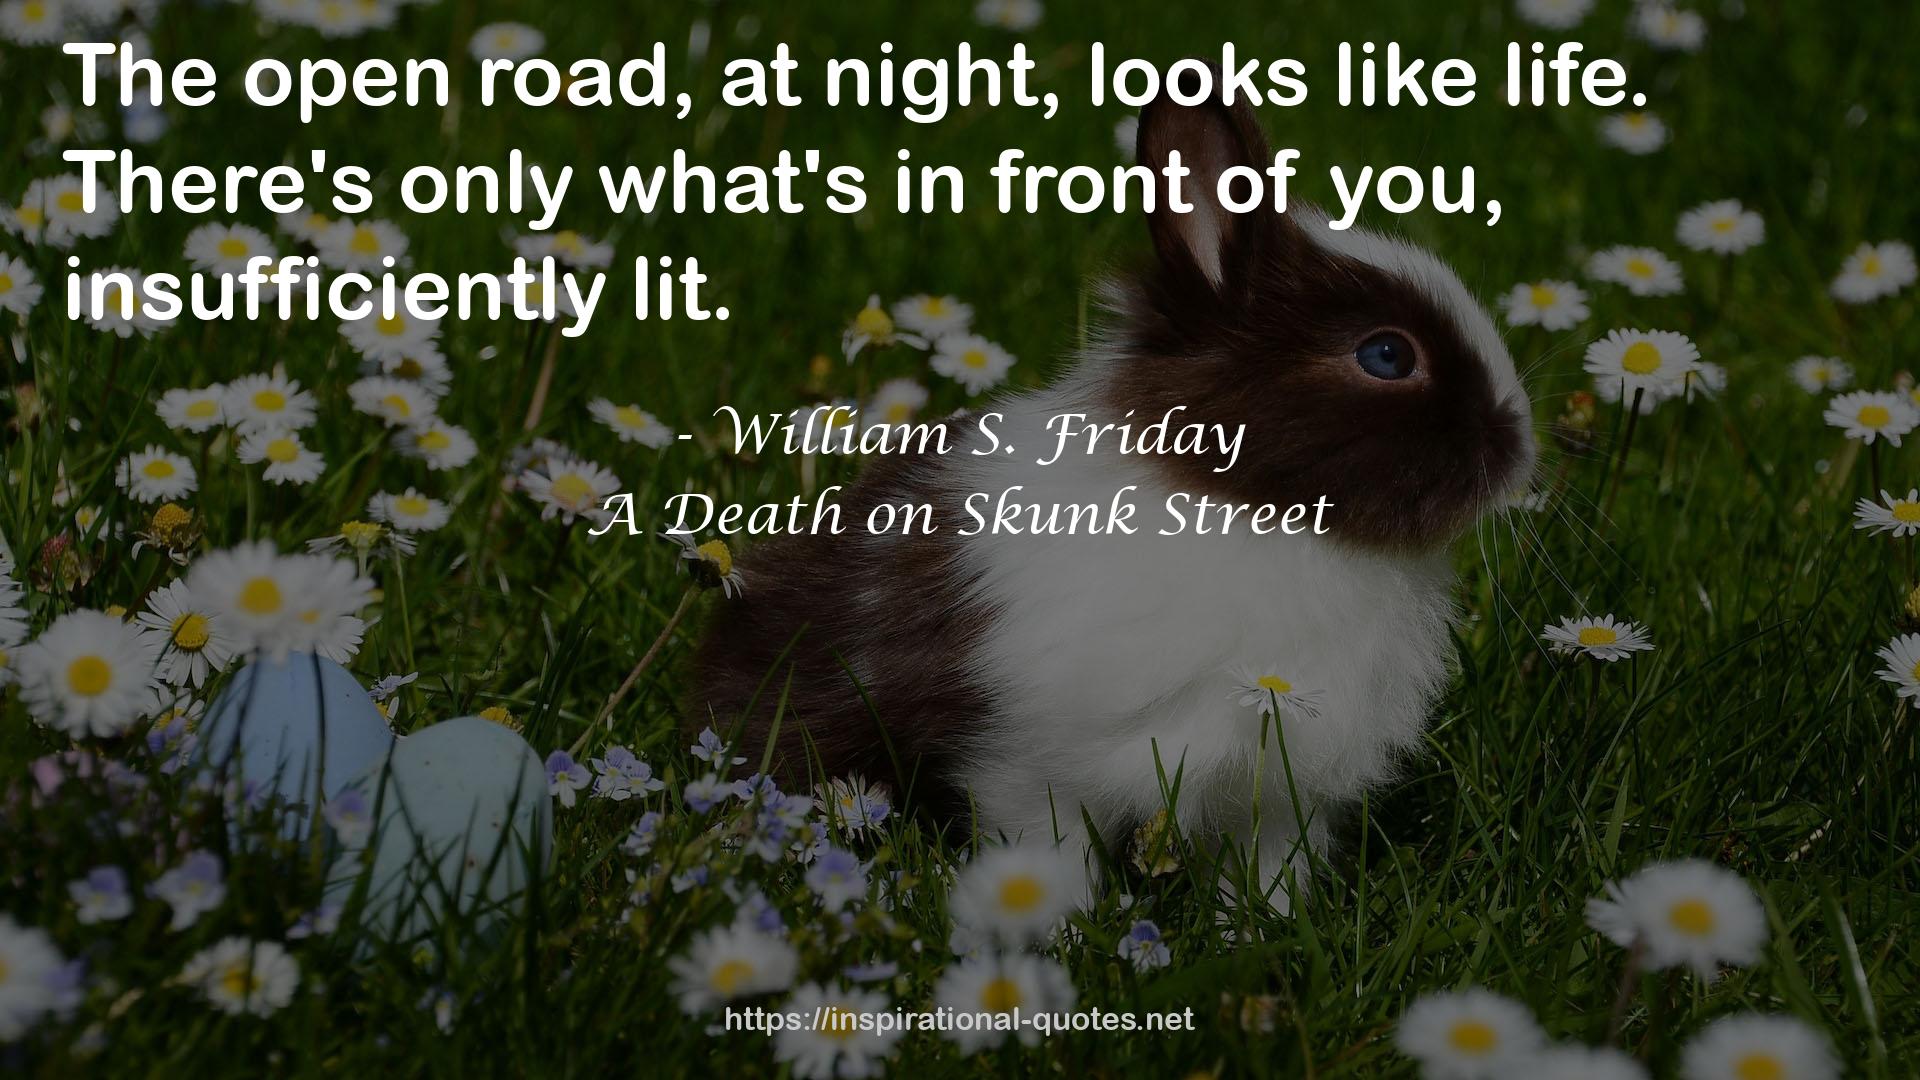 A Death on Skunk Street QUOTES